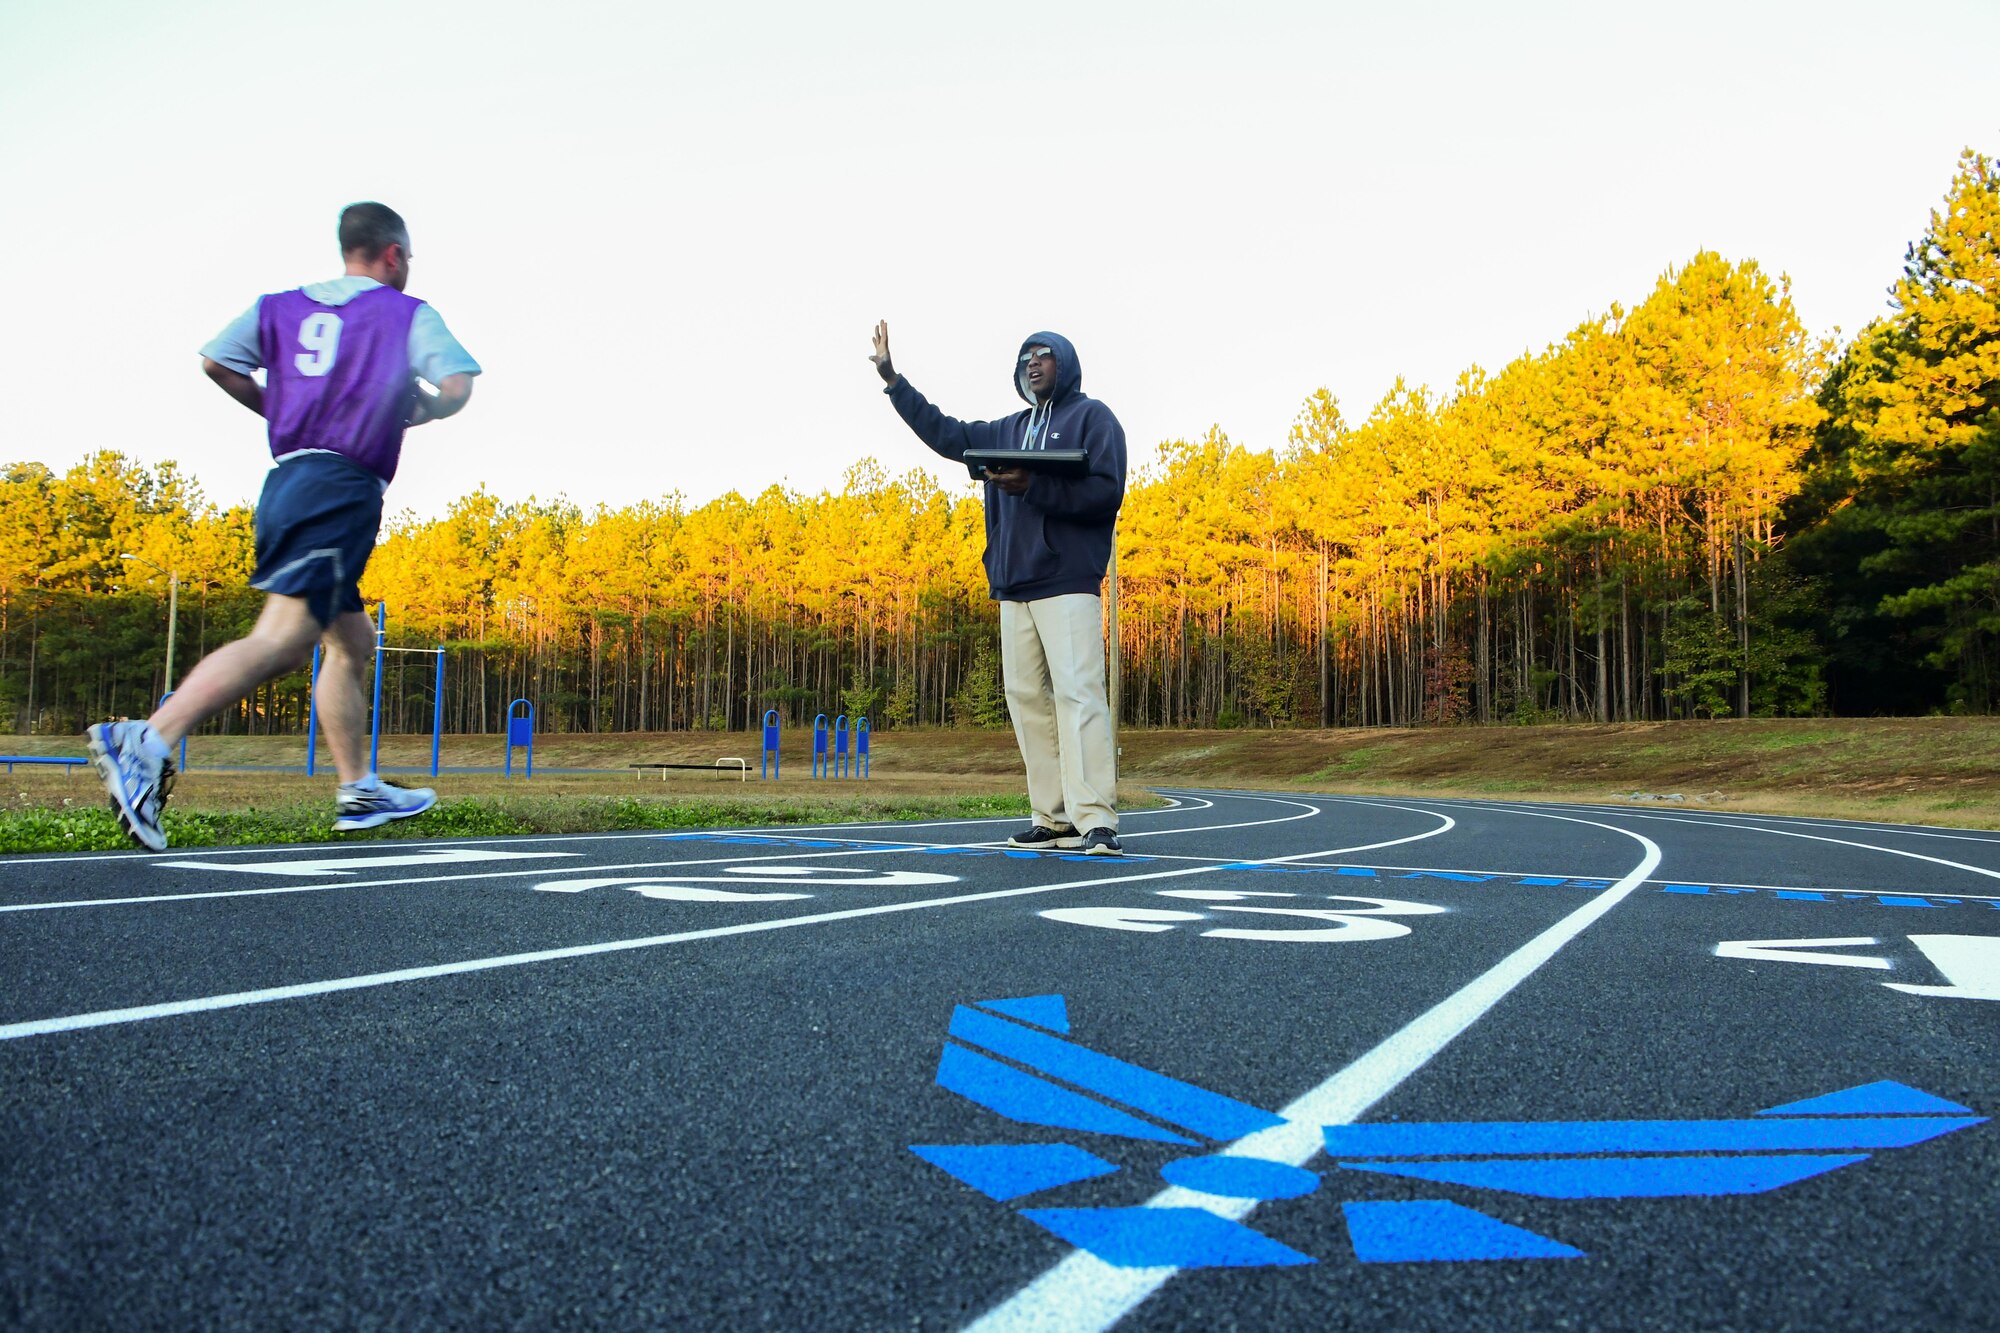 Kenneth Duhart, 94th Airlift Wing exercise physiologist, right, tells a runner his time during a physical fitness test at the Dobbins Air Reserve Base track Oct. 30, 2017. The track was closed for about a month as crews worked to have it repaved and restriped. (U.S. Air Force photo/Staff Sgt. Andrew Park)